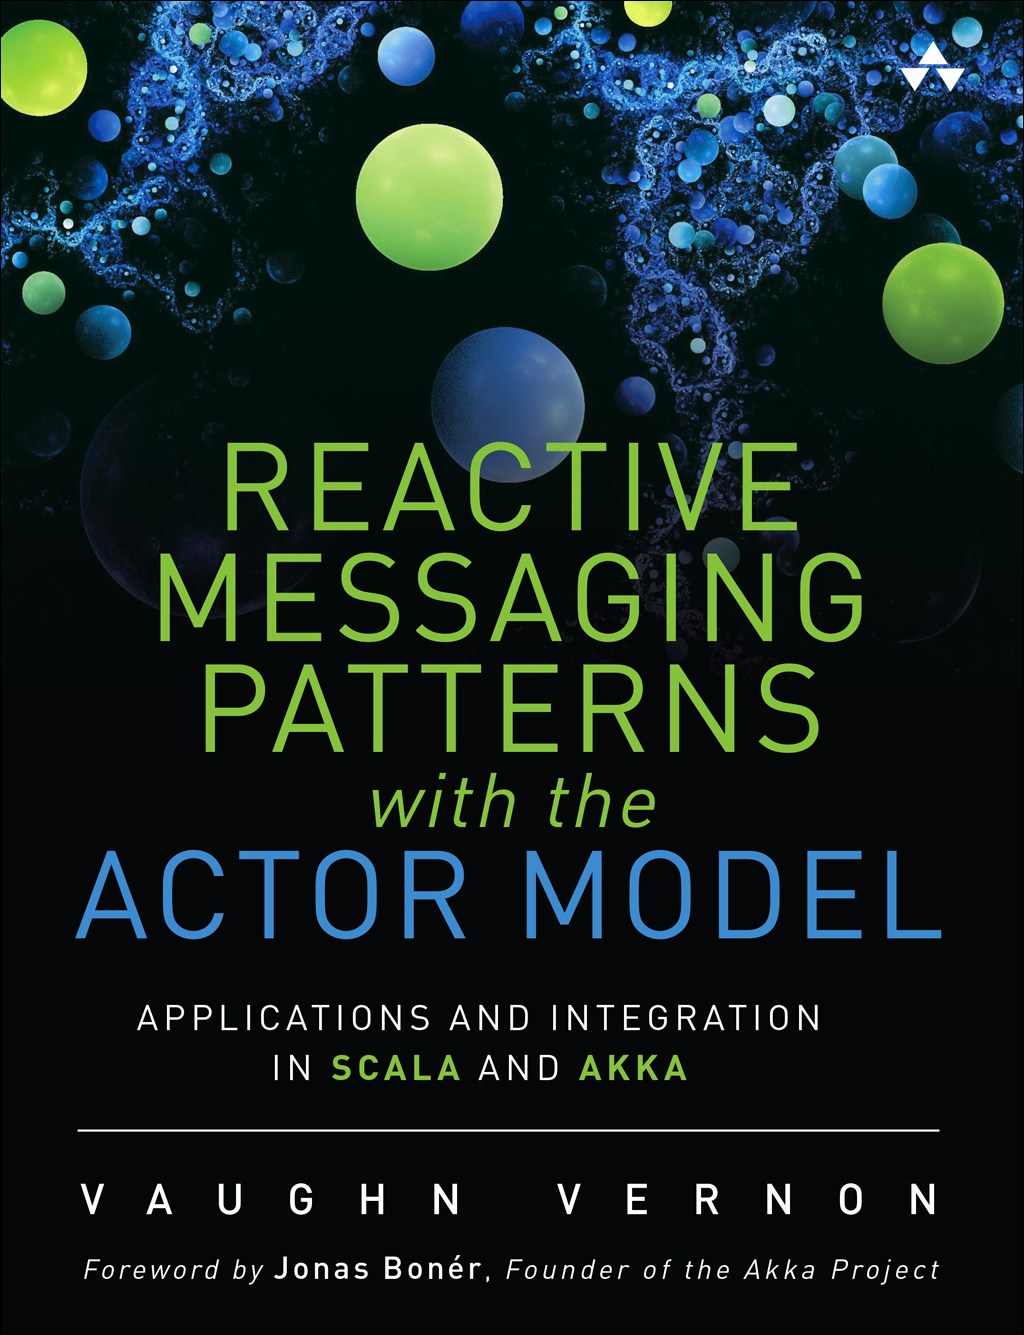 Reactive Messaging Patterns with the Actor Model: Applications and Integration in Scala and Akka